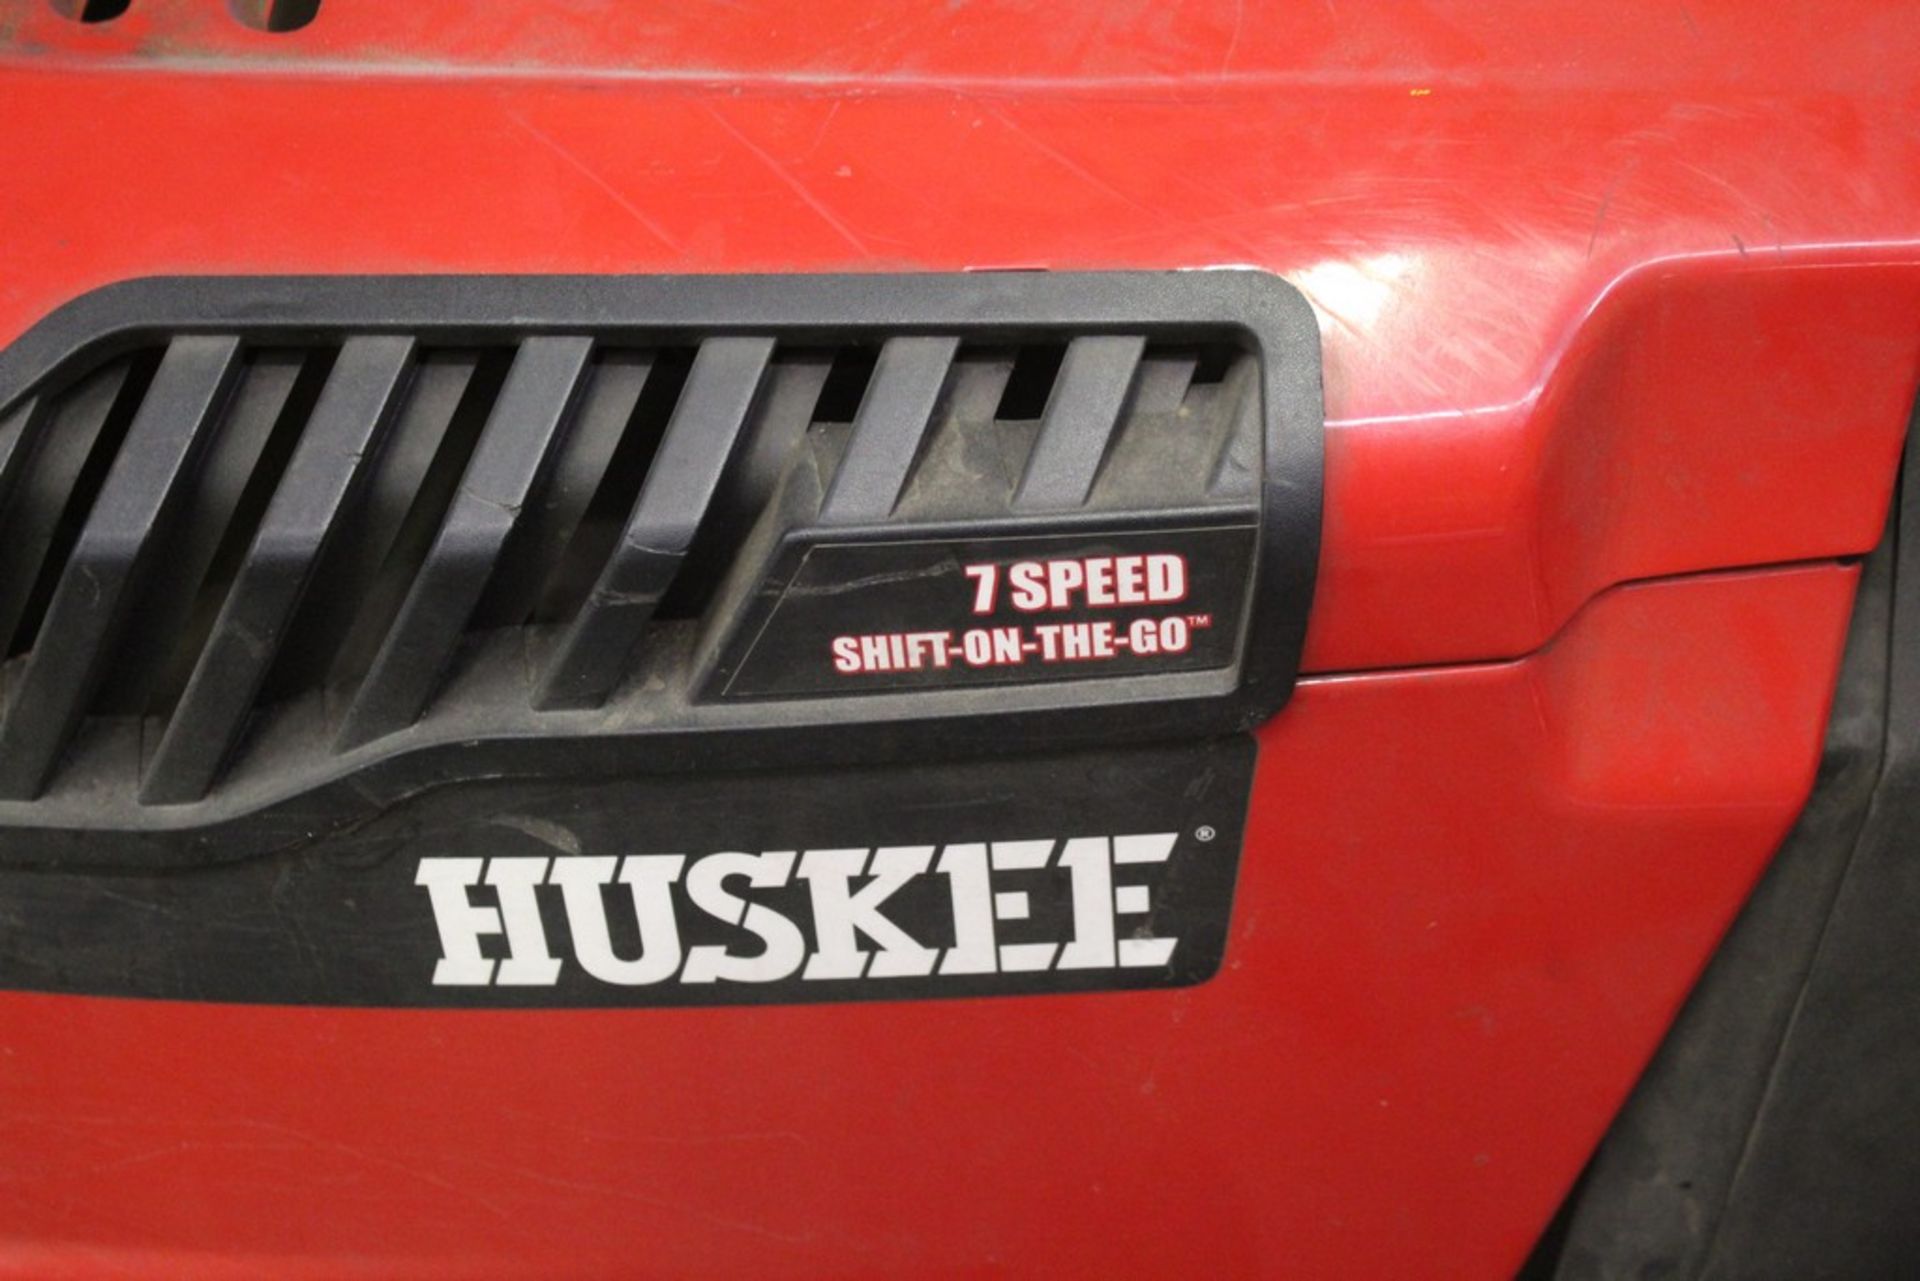 HUSKEE LT4200 LAWN TRACTOR, 7 SPEED SHIFT ON THE GO, 42" DECK, 547CC ENGINE - Image 2 of 4